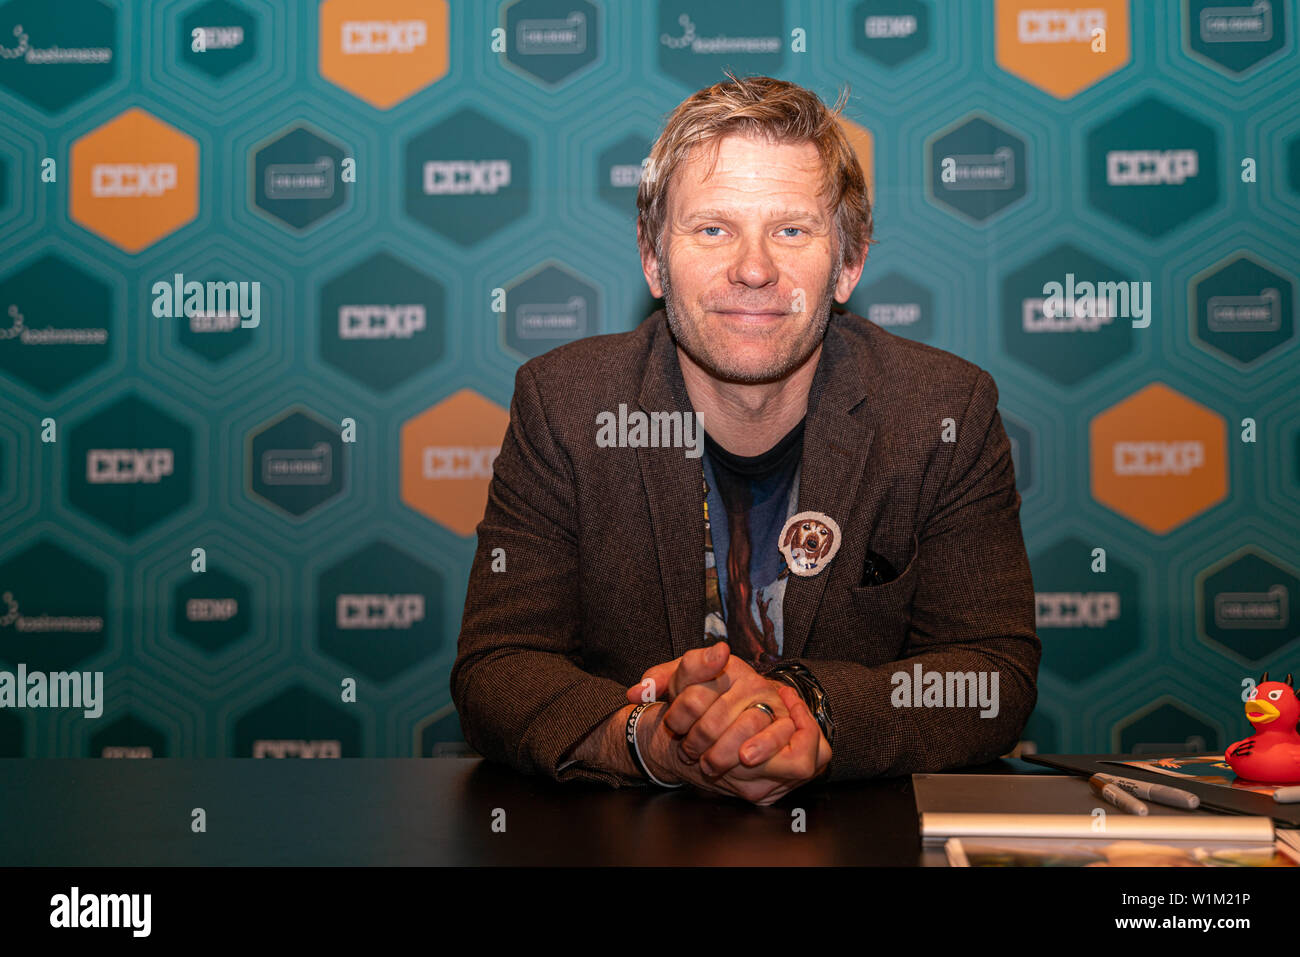 COLOGNE, GERMANY - JUN 28th 2019: Mark Pellegrino (*1965, American actor - LOST, Supernatural) at CCXP Cologne, a four day fan convention Stock Photo